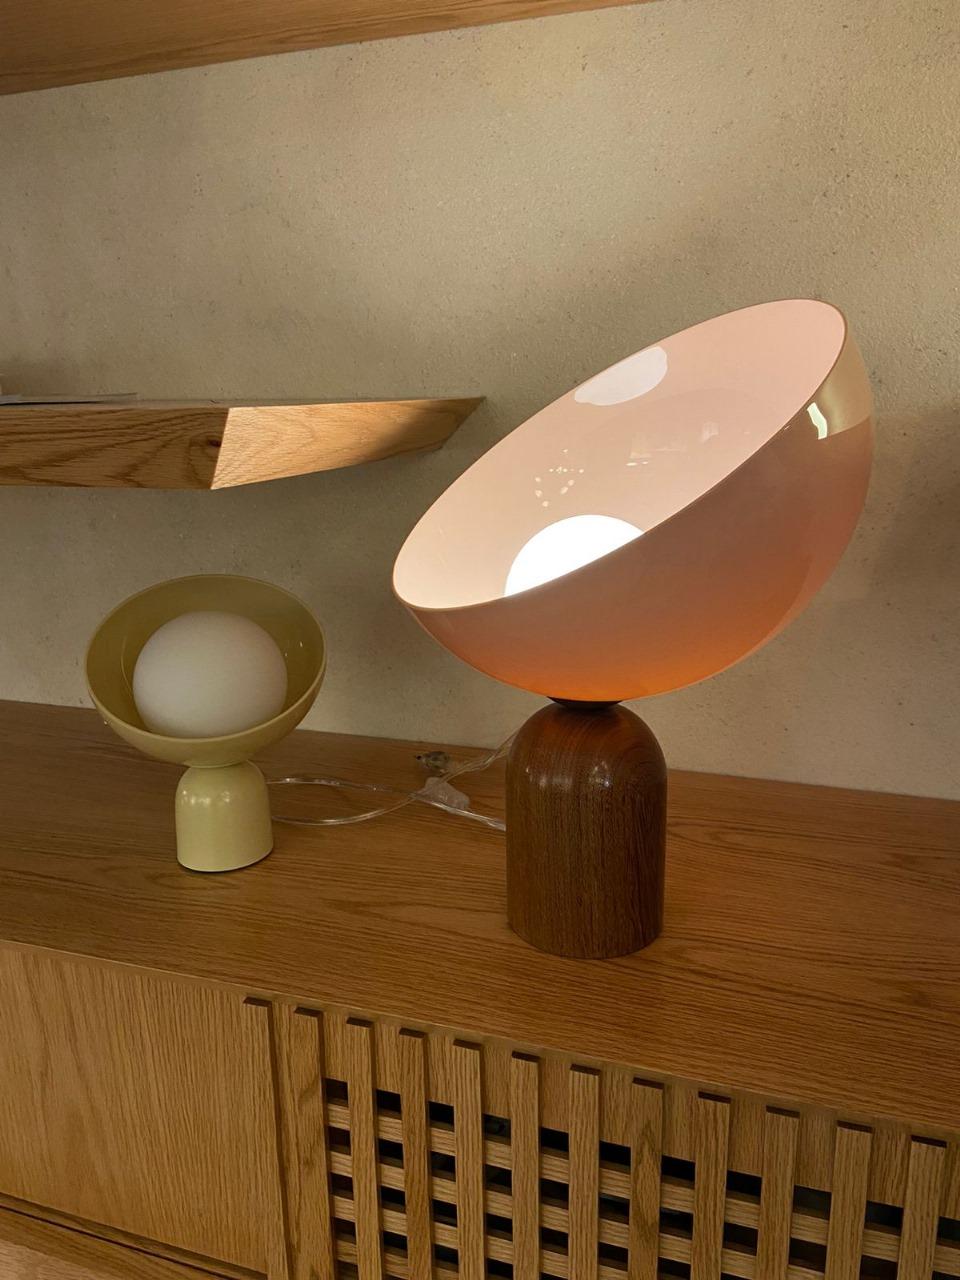 Brazilian contemporary acrylic and wood table lamp - large In New Condition For Sale In Sao Paulo, Sao Paulo